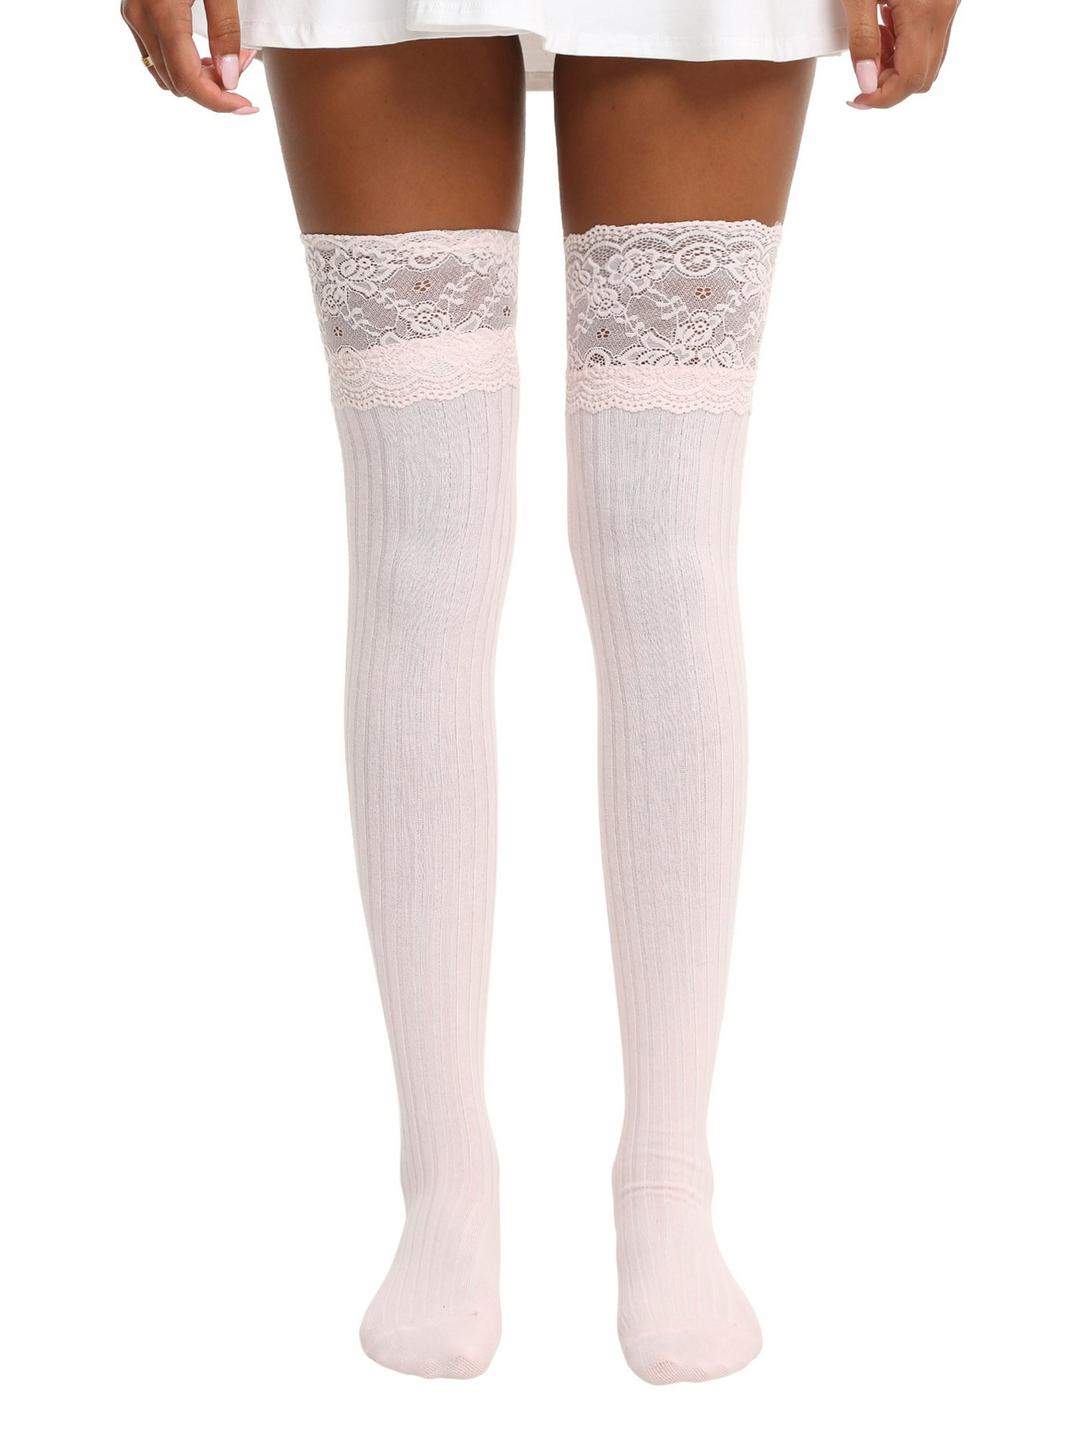 Baby Pink Ruffle Over-The-Knee Socks, , hi-res